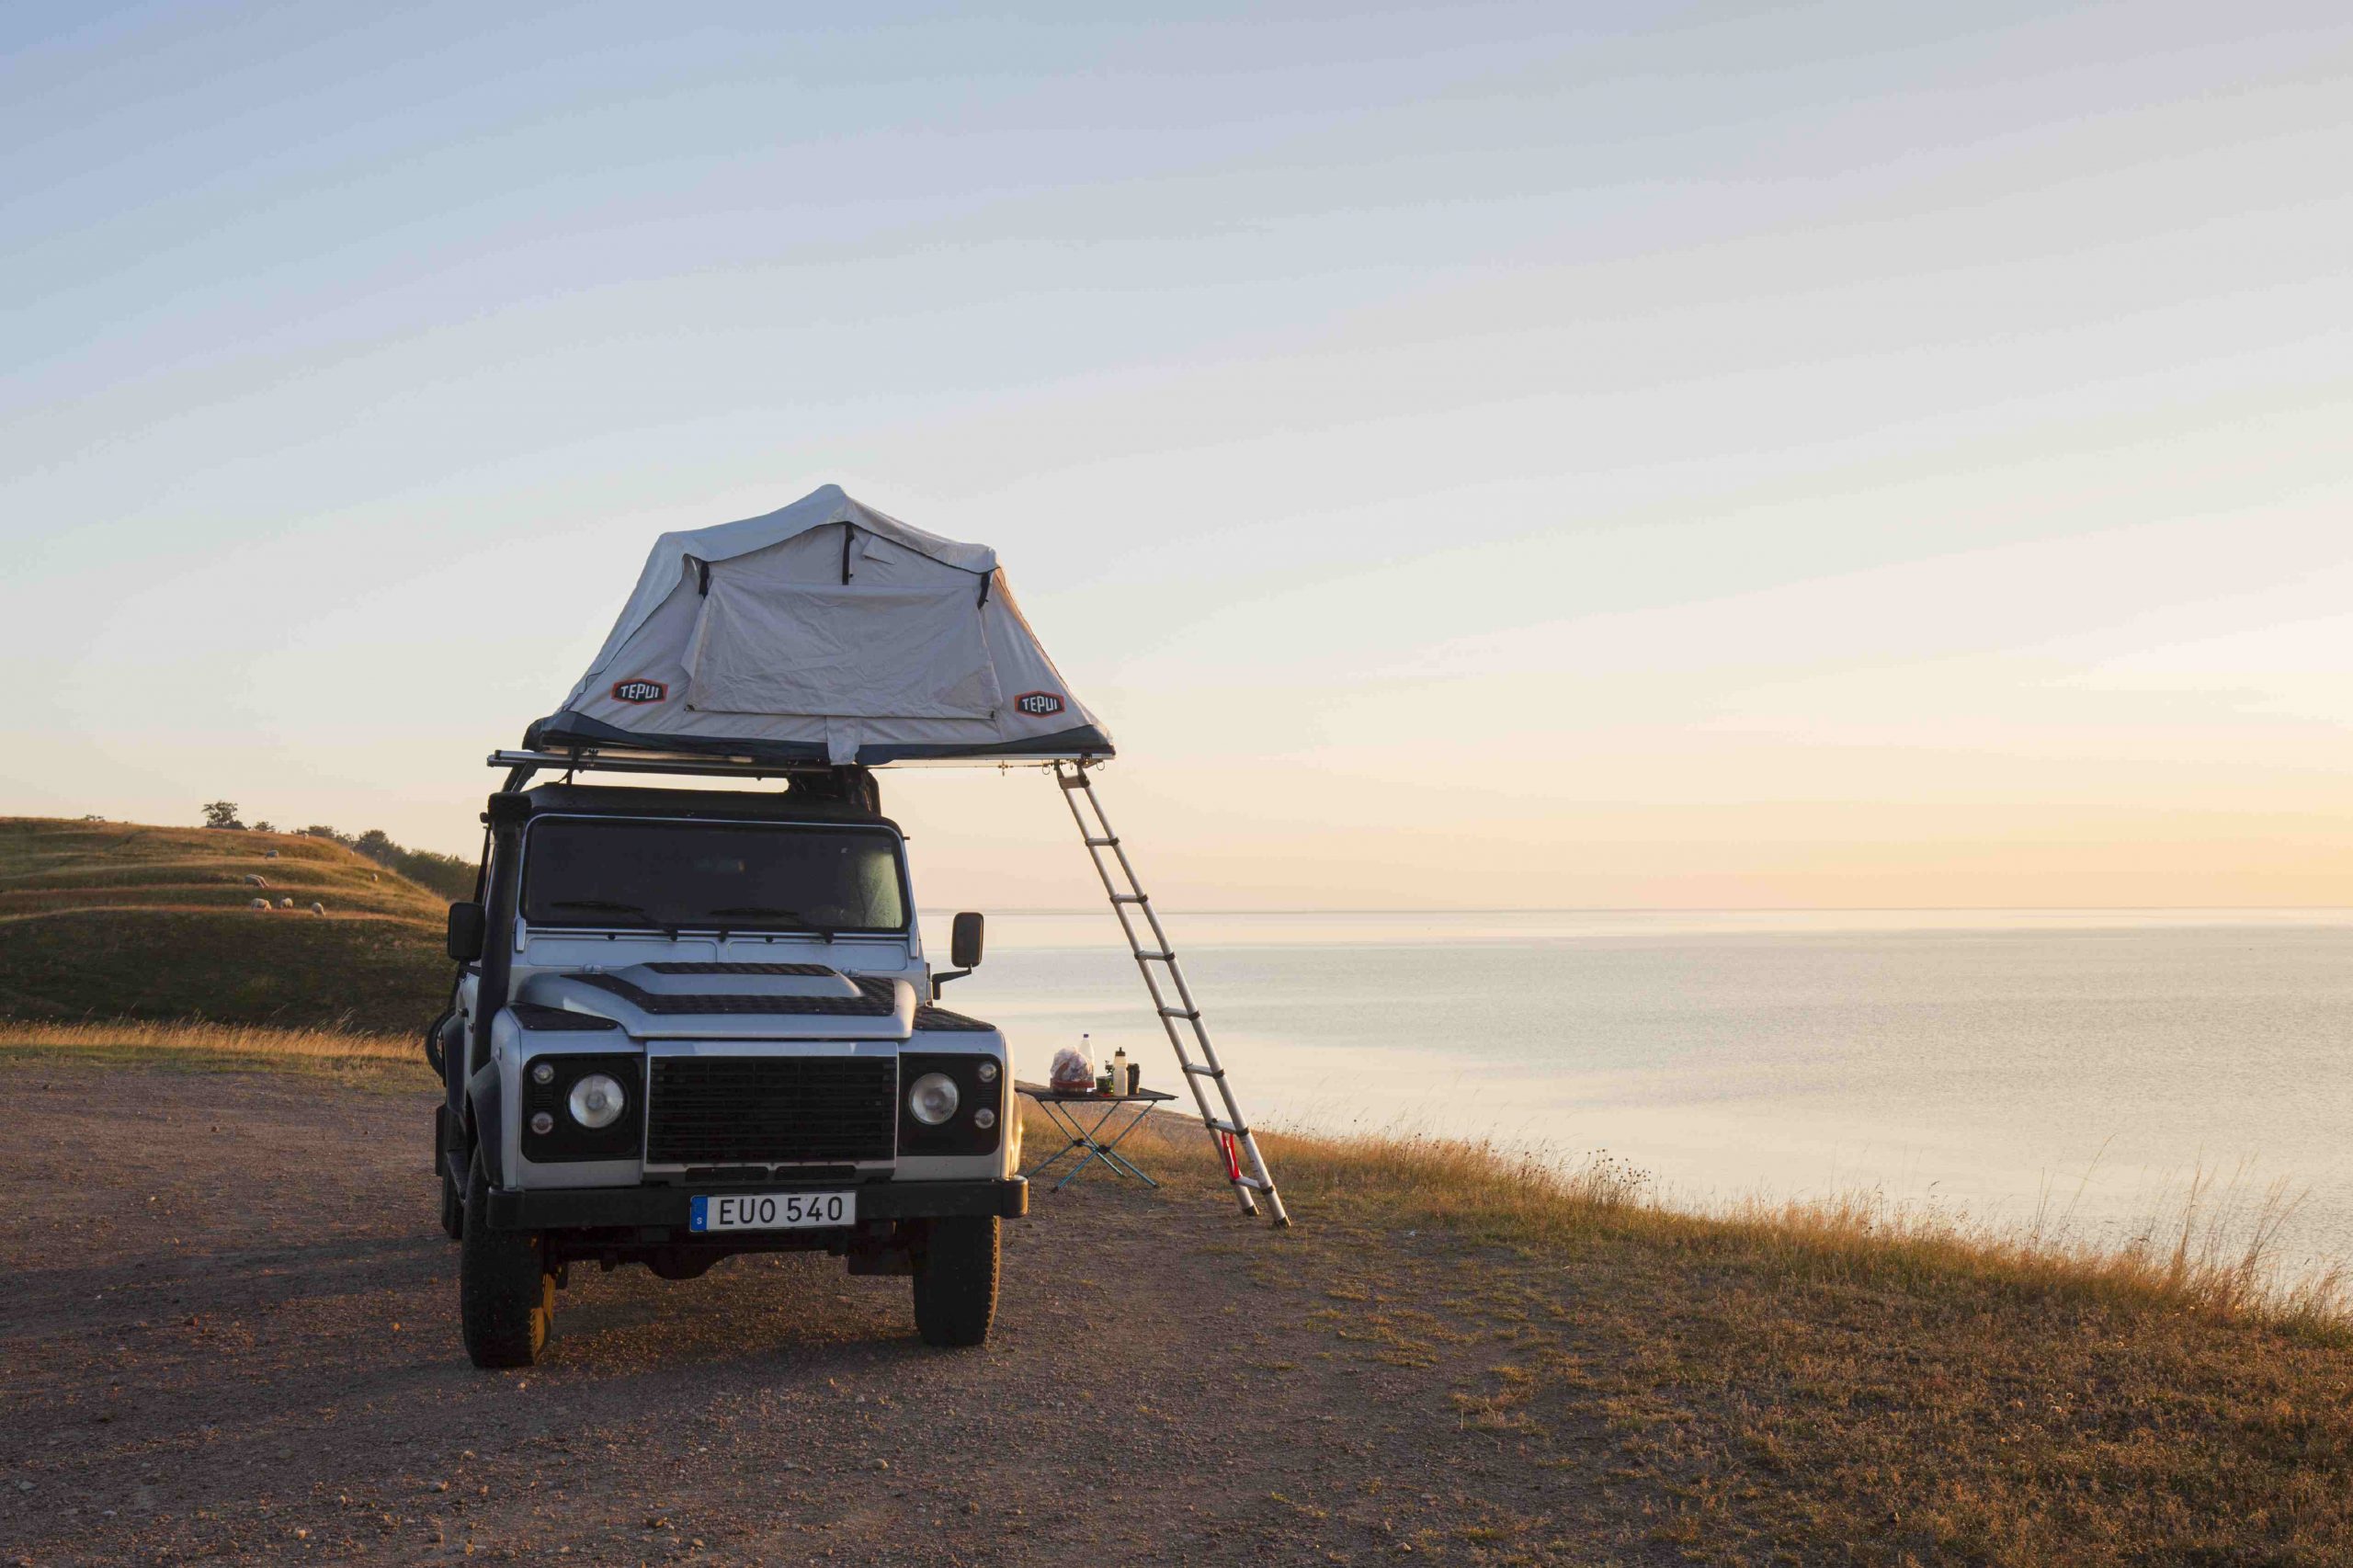 Off-road four-wheel drive vehicle with rooftop tent